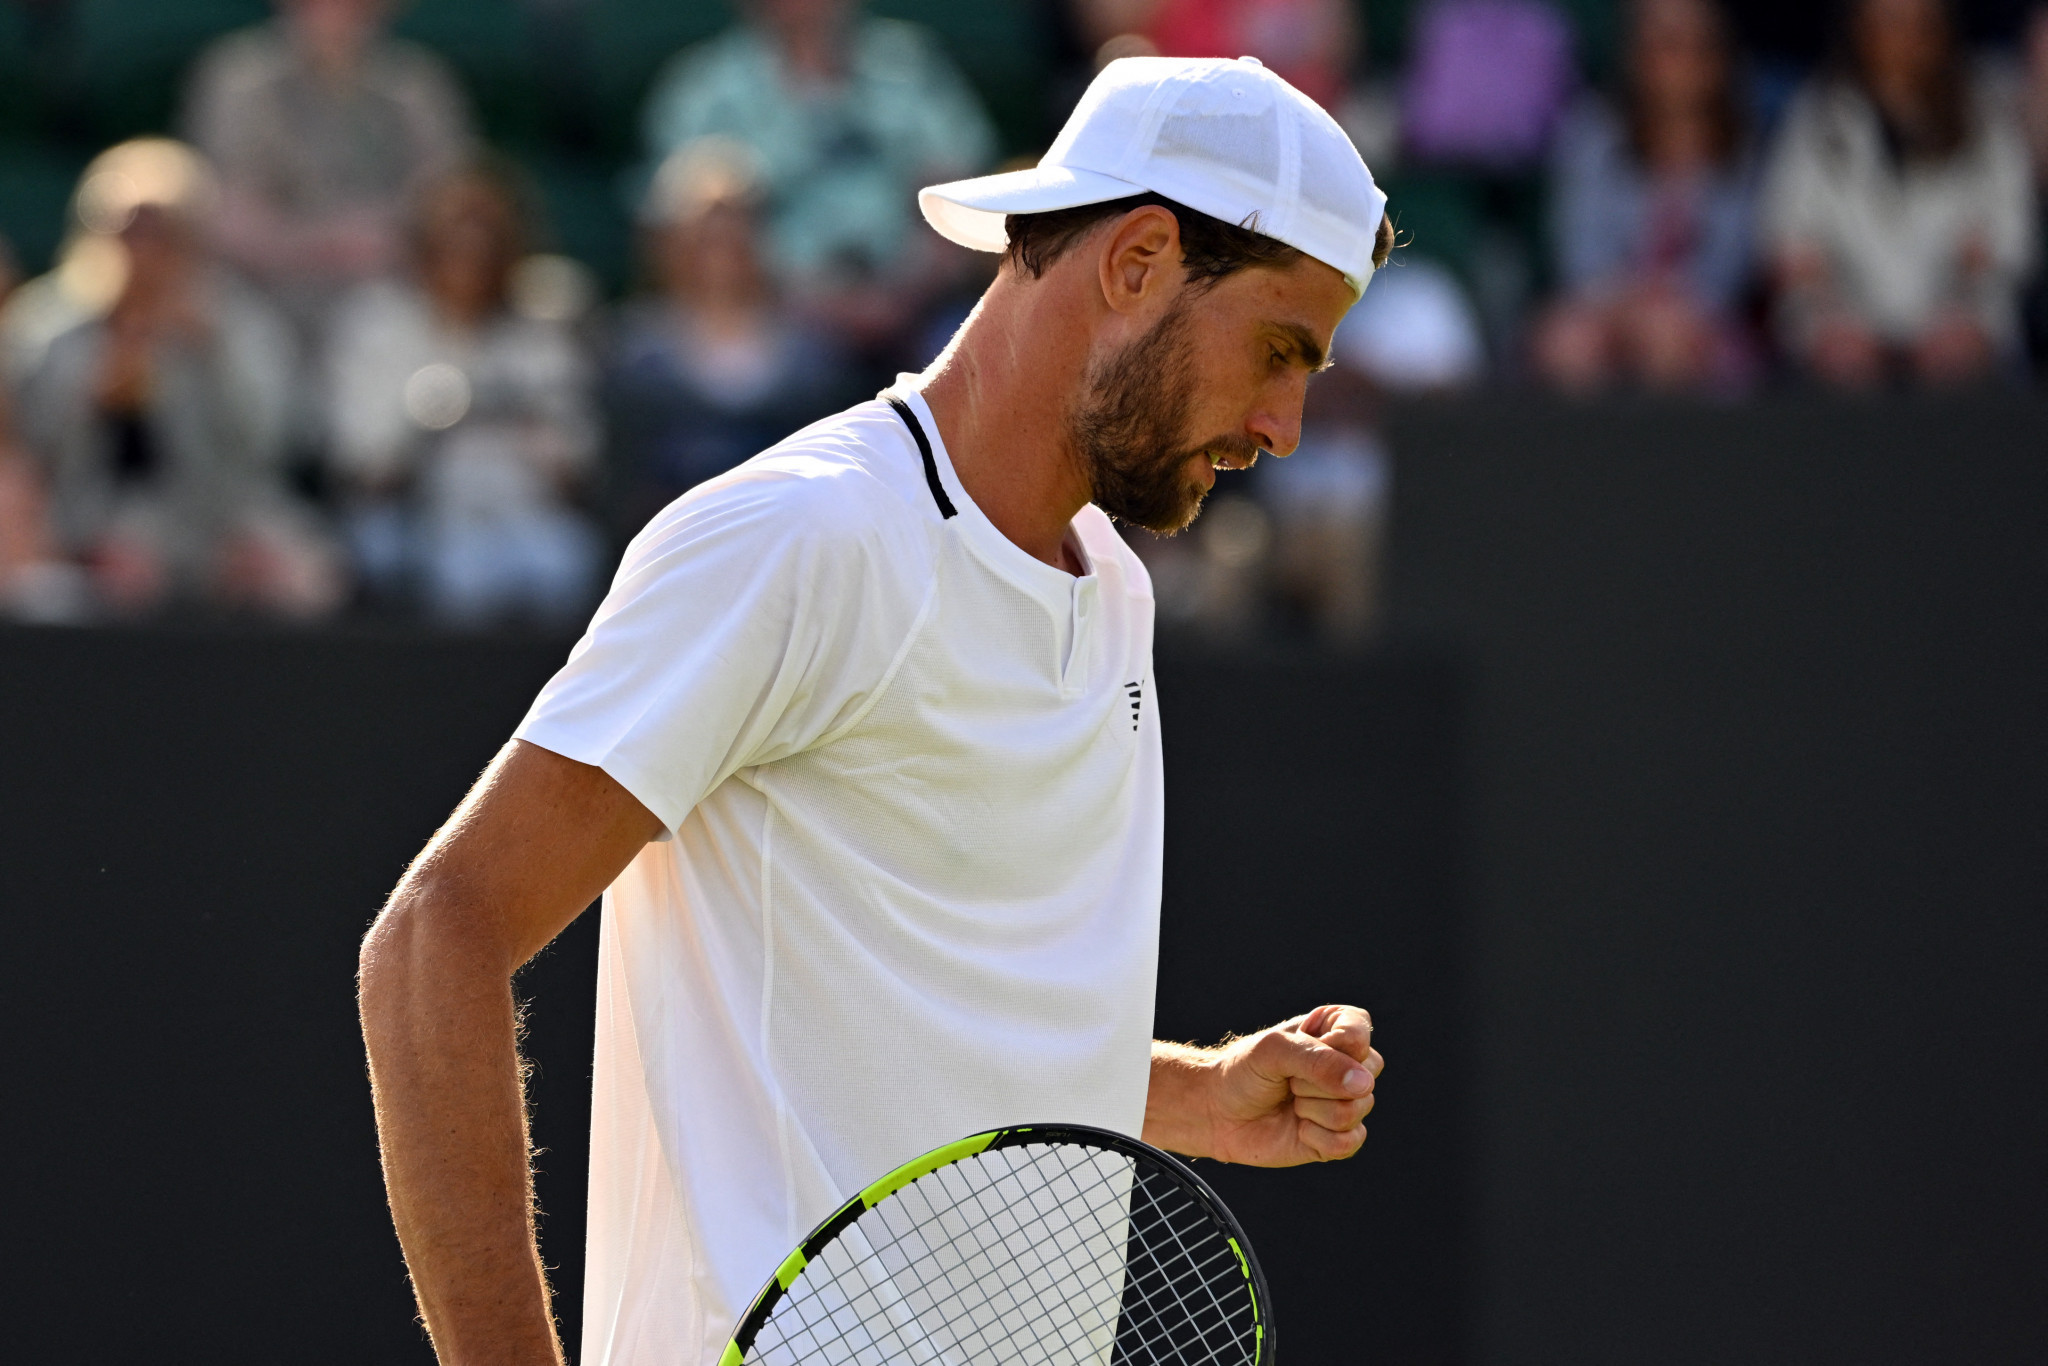 American Maxime Cressy beat him 6-7, 6-4, 7-6, 7-6 ©Getty Images